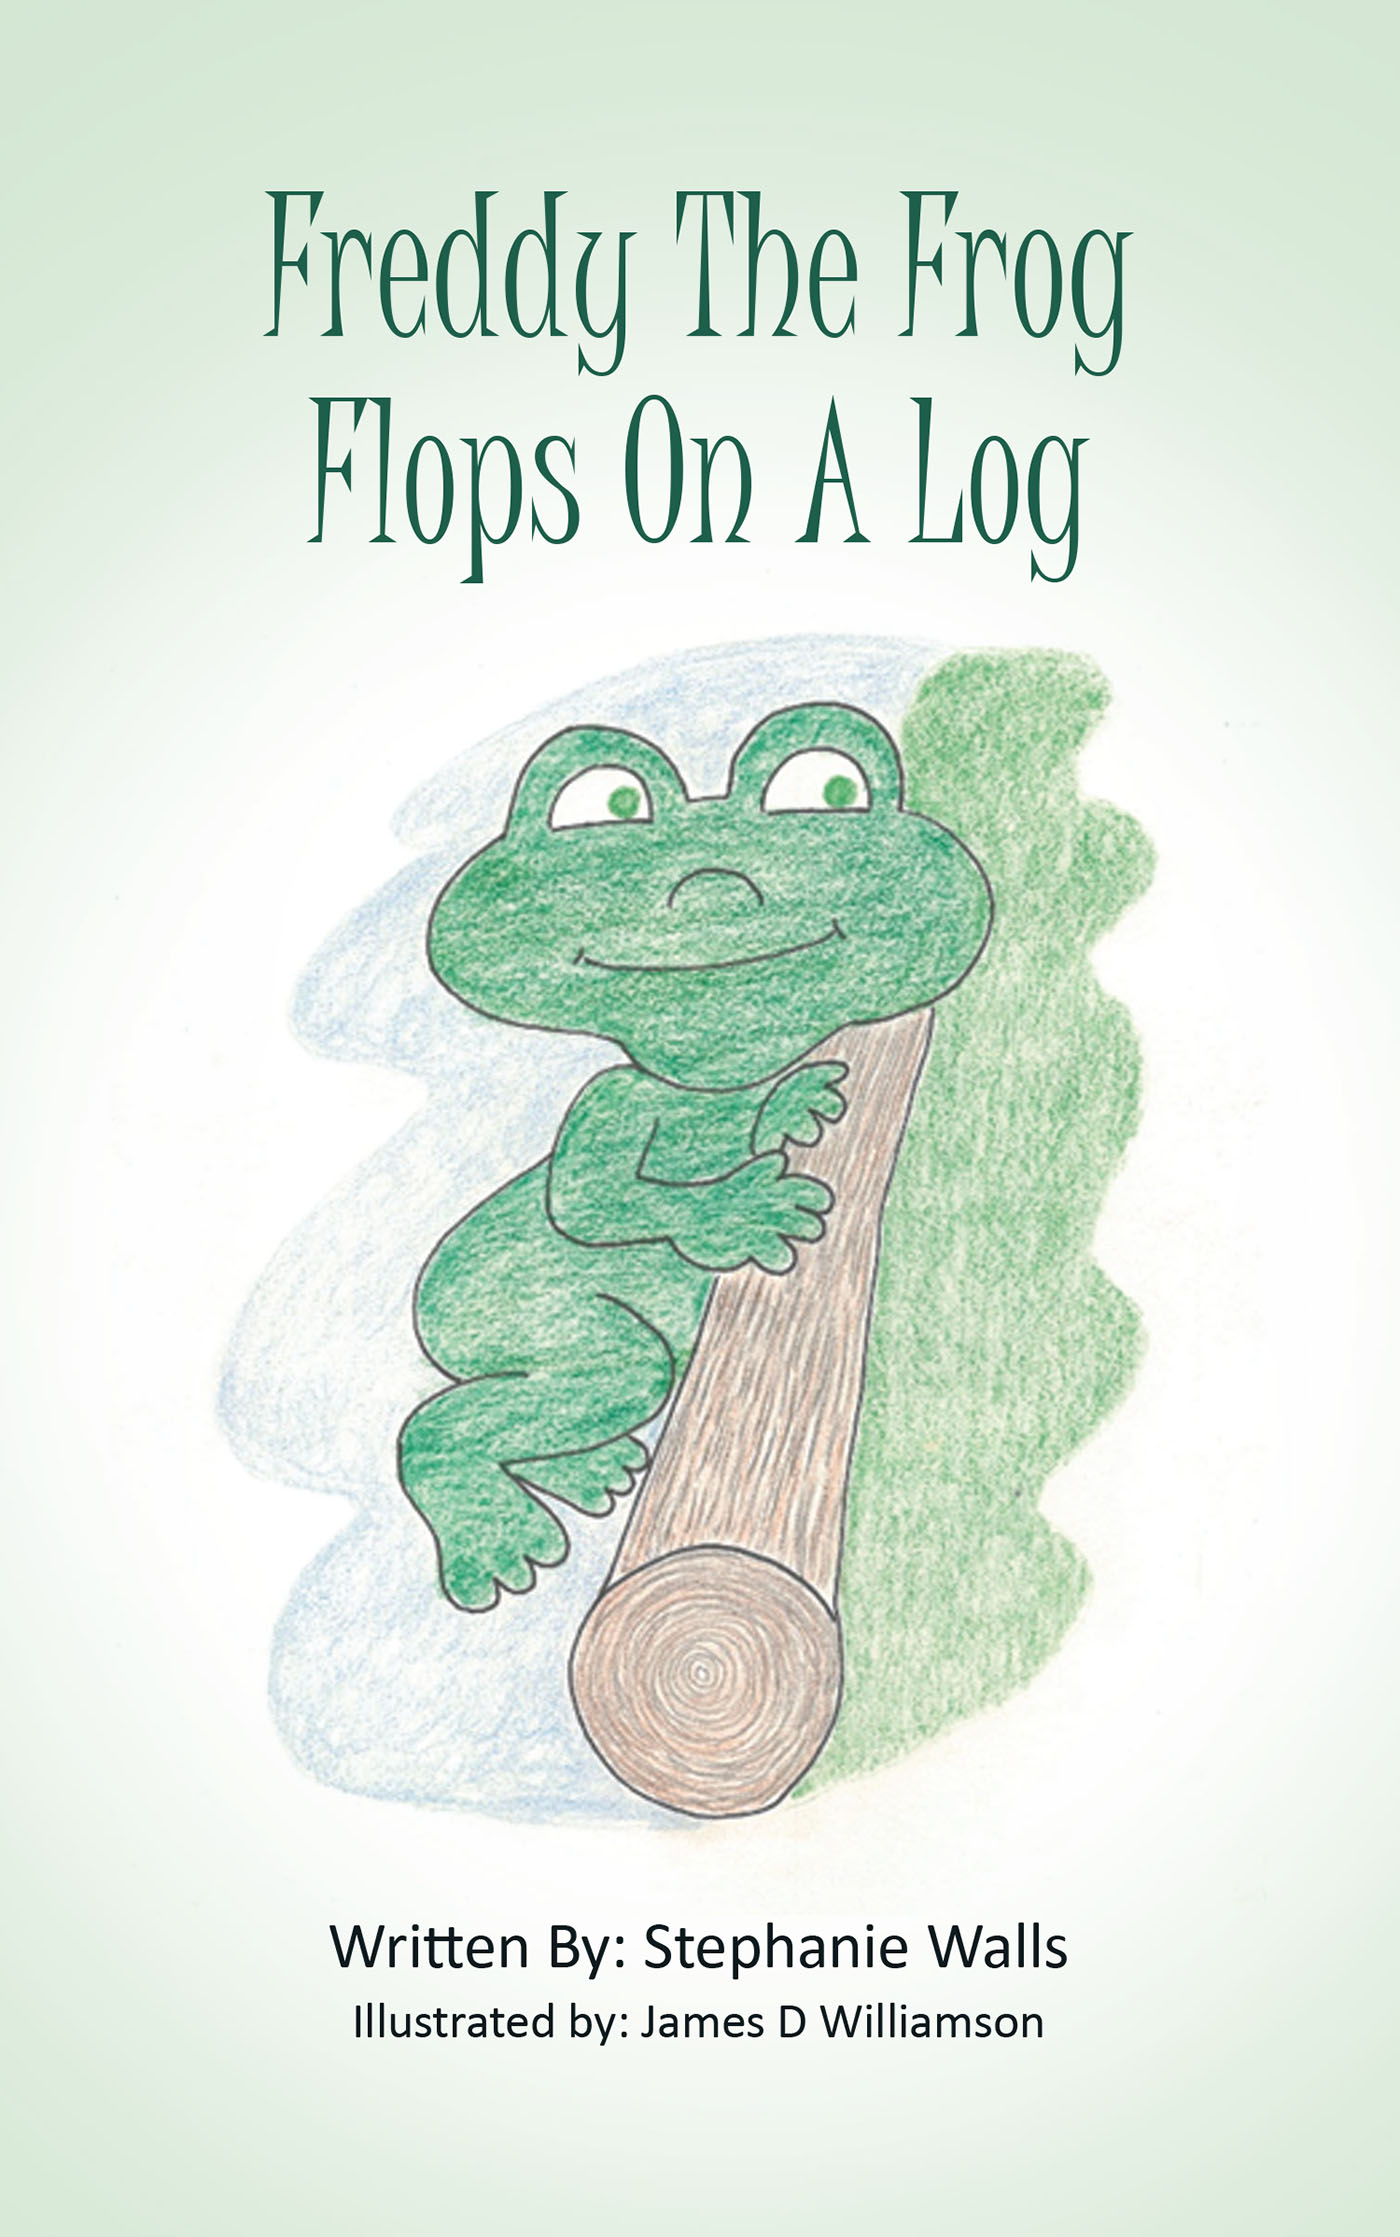 Author Stephanie Walls’s New Book, "Freddy the Frog Flops on a Log," is a Creative Children’s Story About a Restless Boy Who is Told a Bedtime Story About a Busy Frog